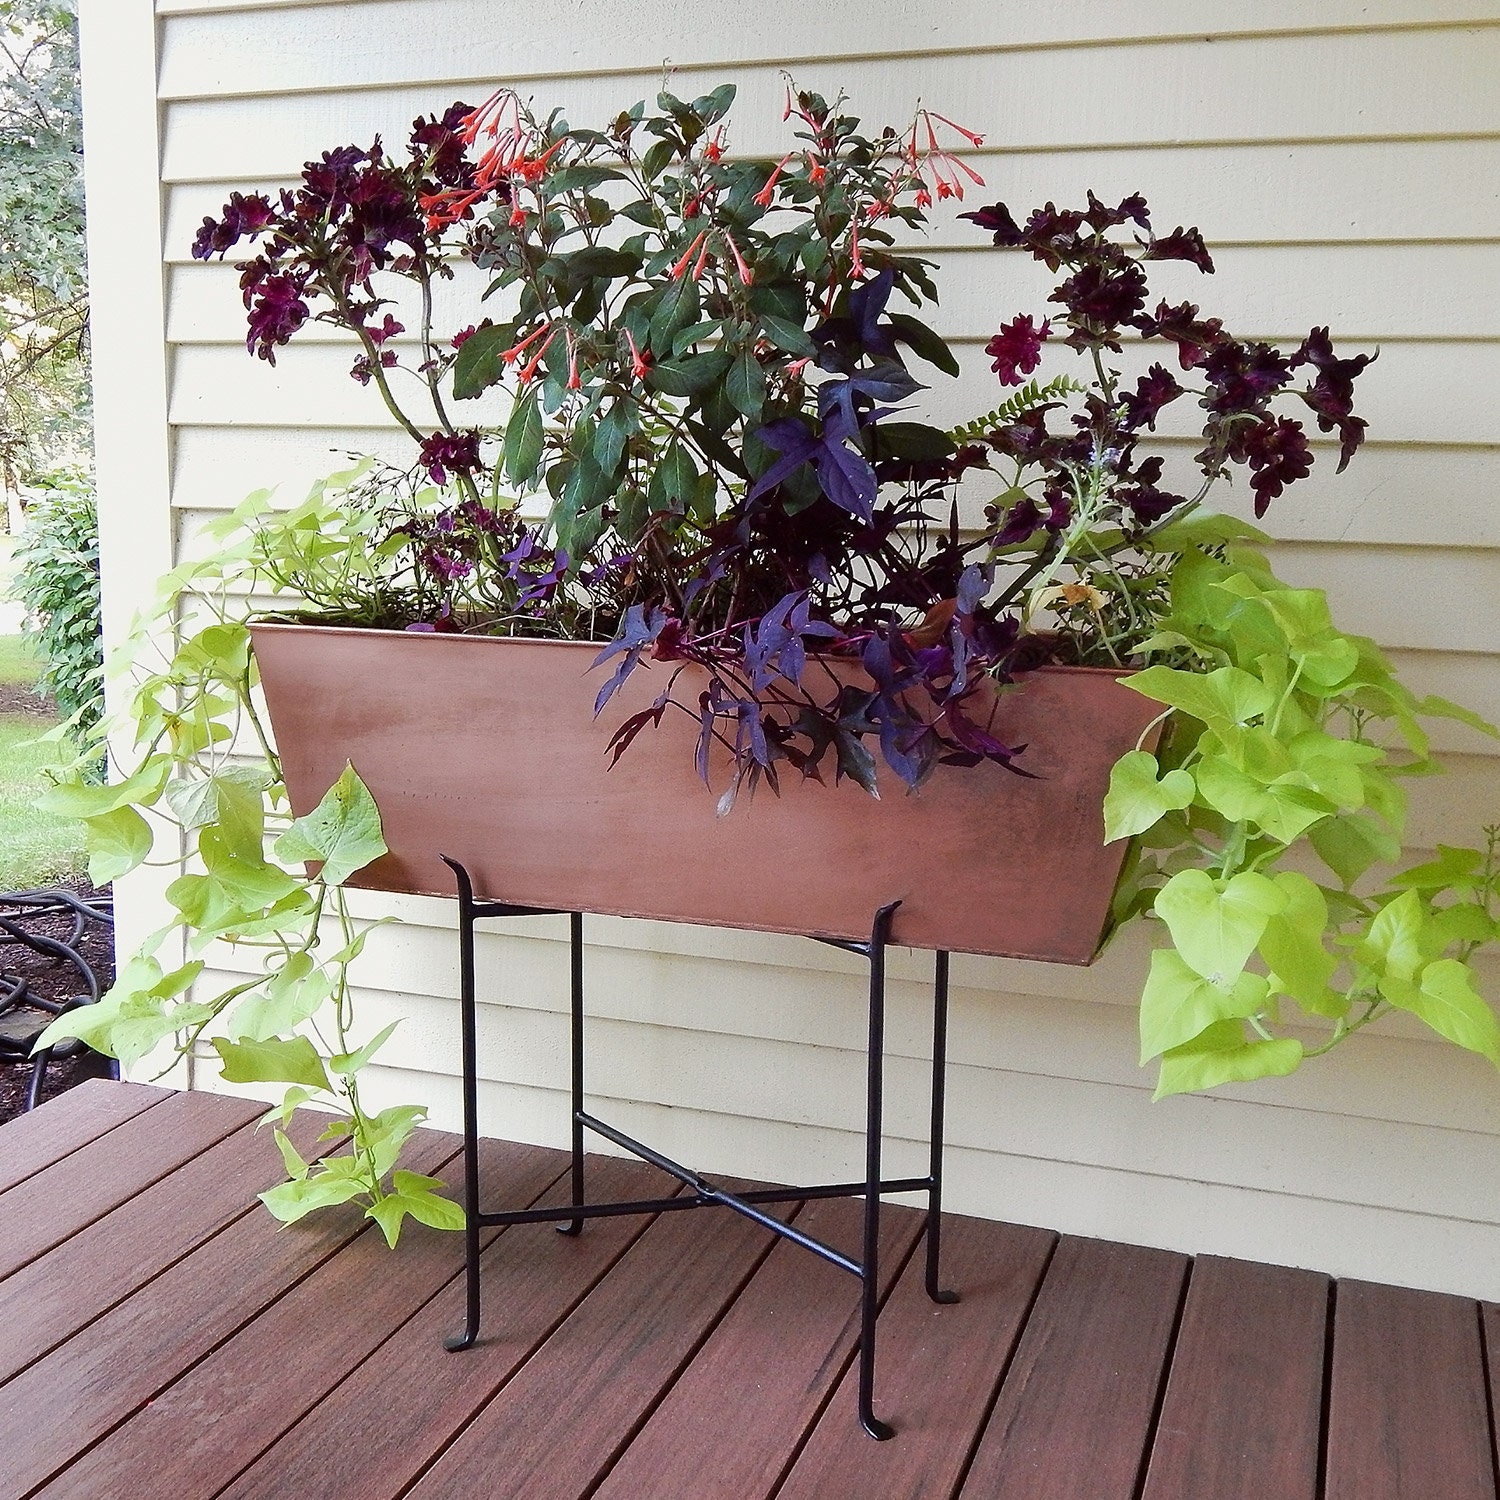 Shop Planters, Stands & Window Boxes at